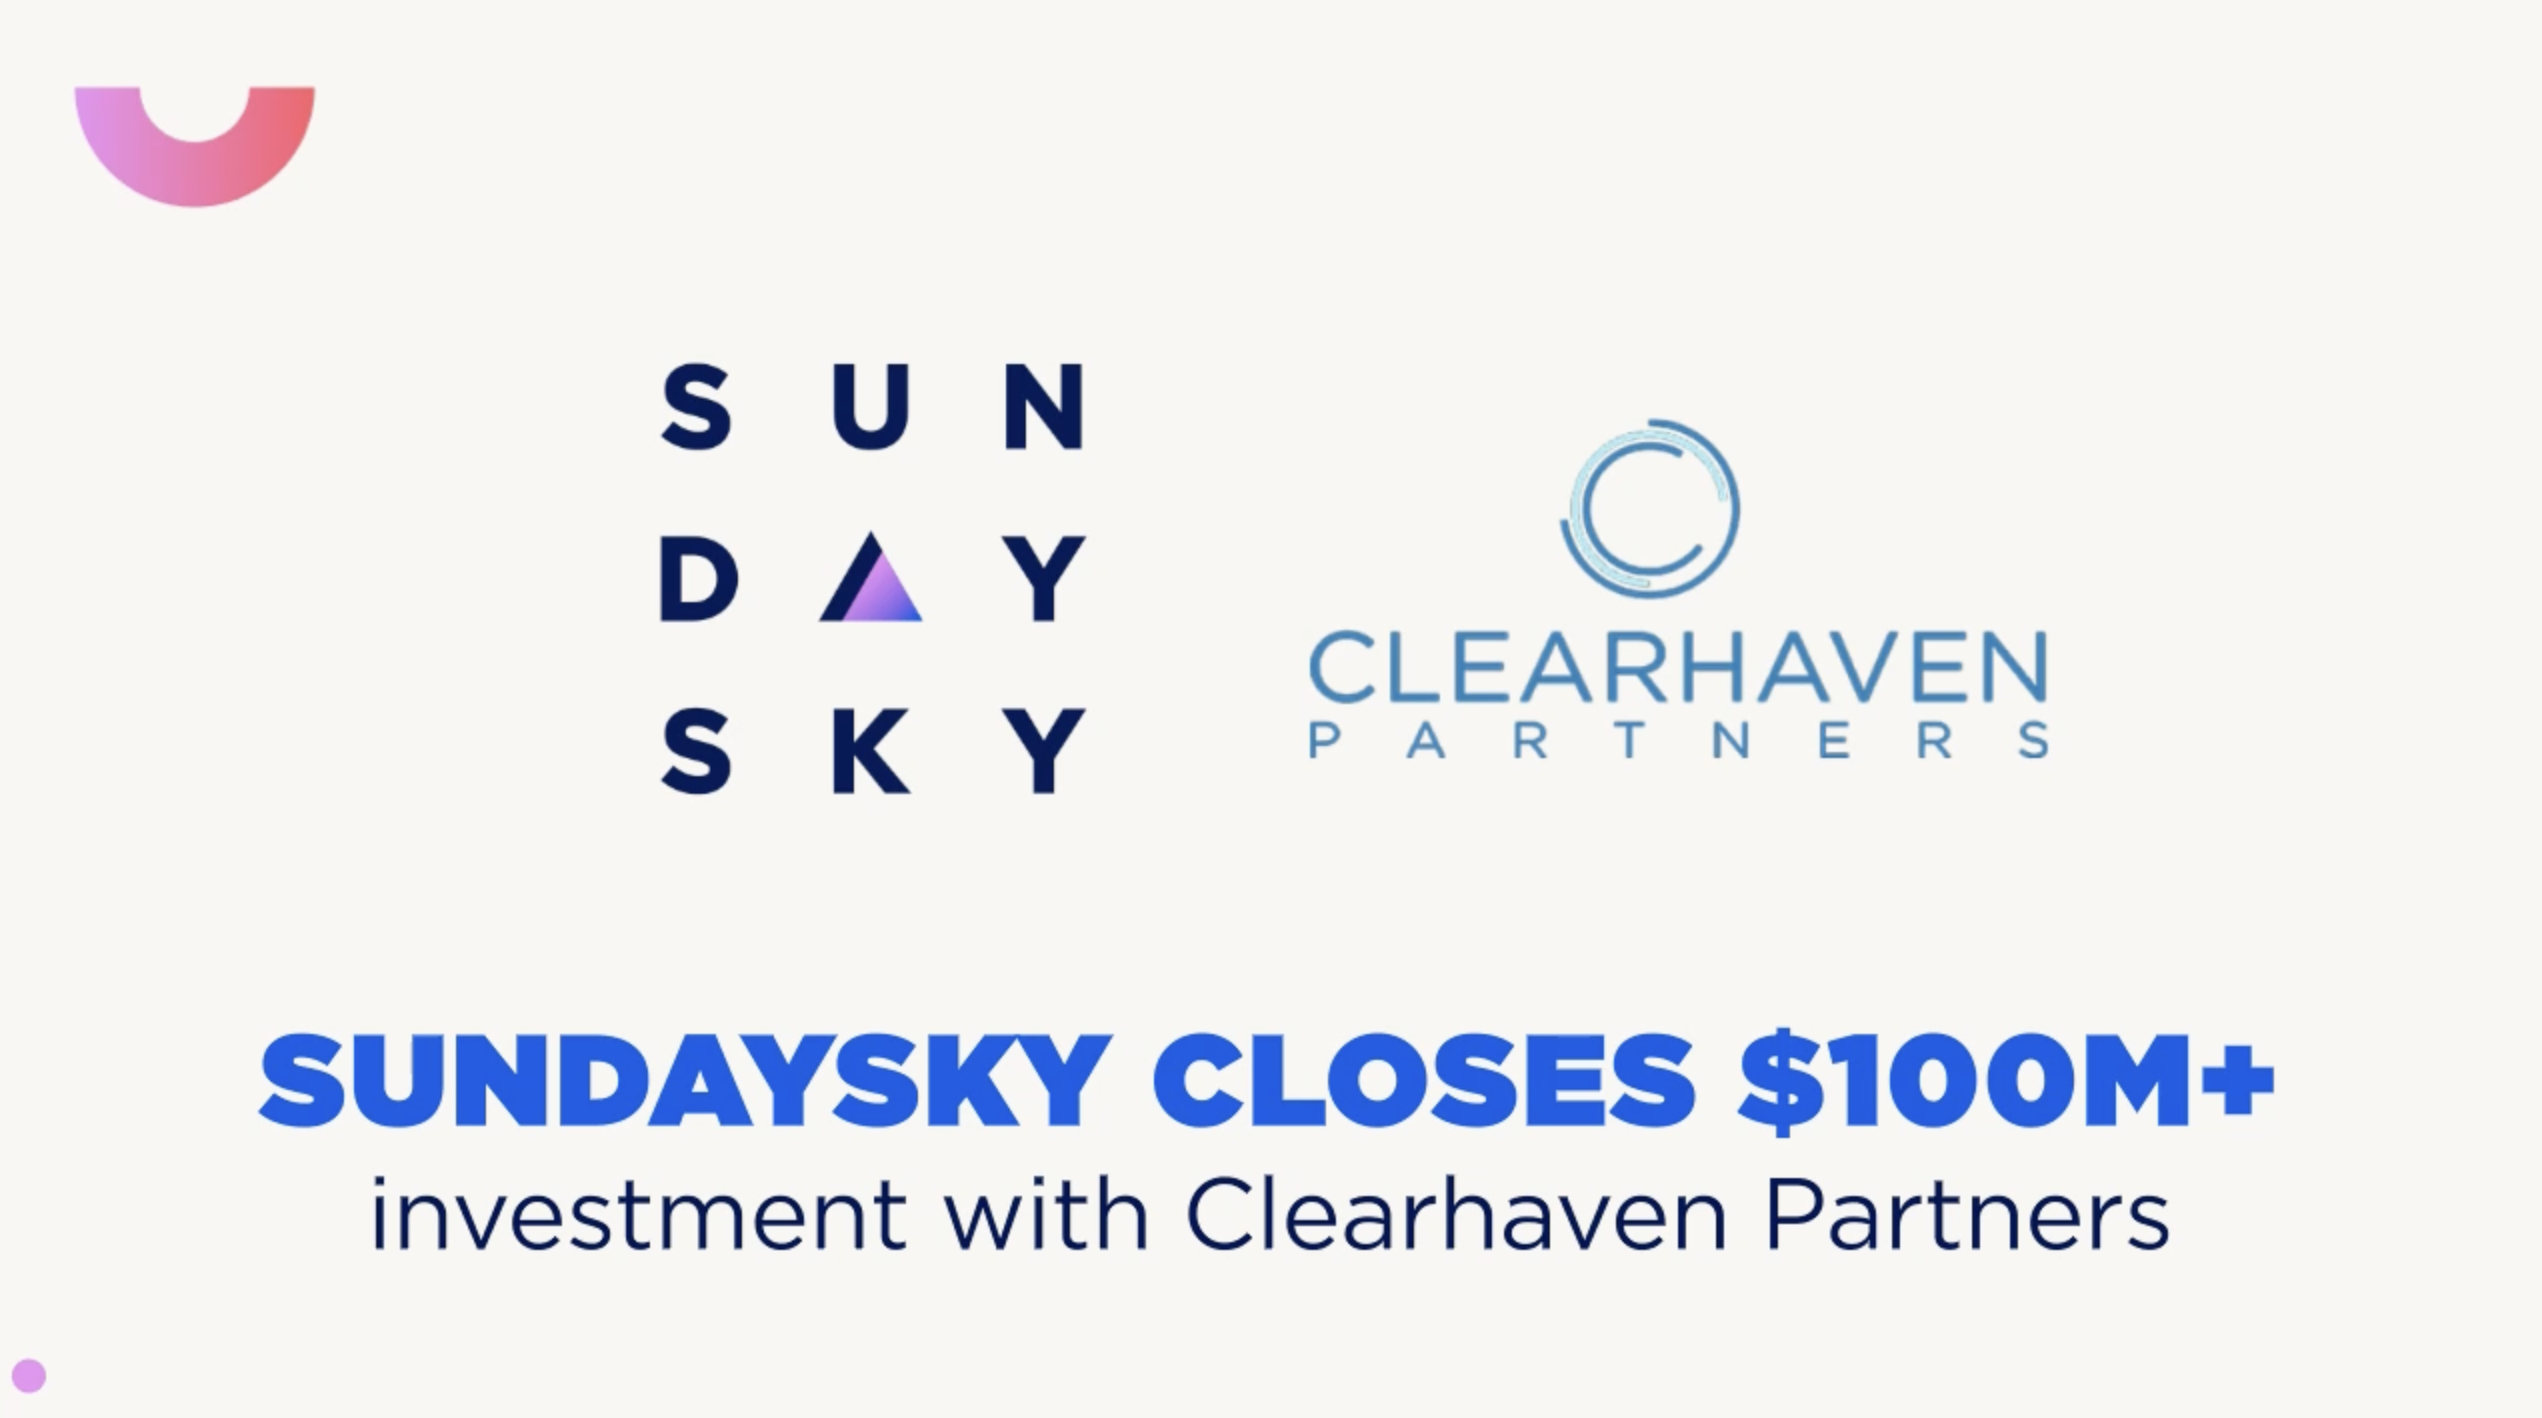 Clearhaven Partners invests $100M+ for a controlling interest in SundaySky